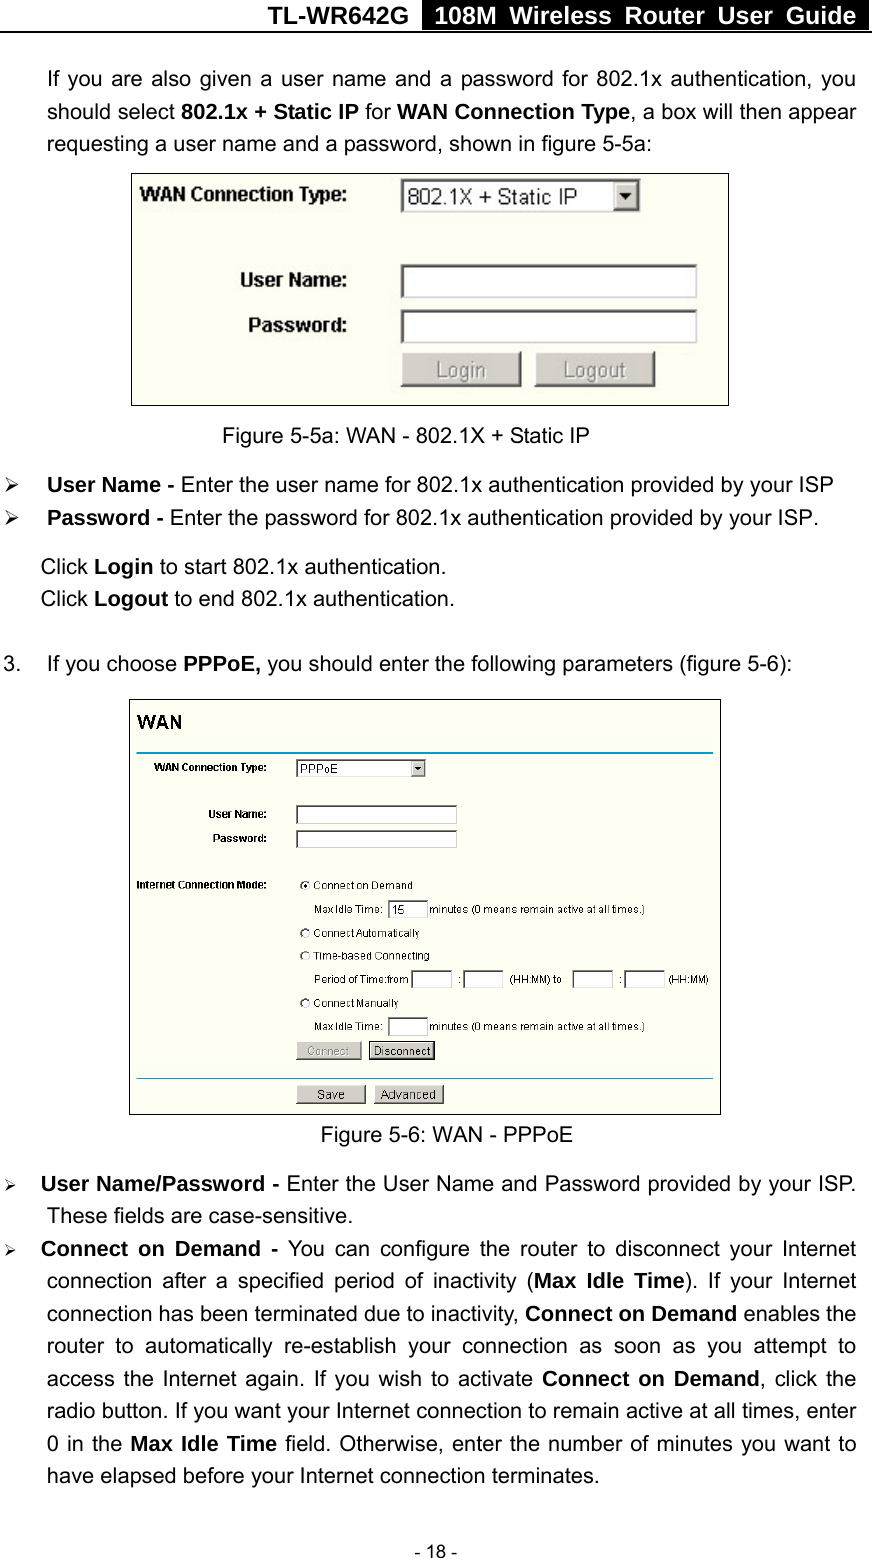 TL-WR642G   108M Wireless Router User Guide   - 18 - If you are also given a user name and a password for 802.1x authentication, you should select 802.1x + Static IP for WAN Connection Type, a box will then appear requesting a user name and a password, shown in figure 5-5a:       Figure 5-5a: WAN - 802.1X + Static IP ¾ User Name - Enter the user name for 802.1x authentication provided by your ISP ¾ Password - Enter the password for 802.1x authentication provided by your ISP. Click Login to start 802.1x authentication. Click Logout to end 802.1x authentication.  3.  If you choose PPPoE, you should enter the following parameters (figure 5-6):    Figure 5-6: WAN - PPPoE ¾ User Name/Password - Enter the User Name and Password provided by your ISP. These fields are case-sensitive. ¾ Connect on Demand - You can configure the router to disconnect your Internet connection after a specified period of inactivity (Max Idle Time). If your Internet connection has been terminated due to inactivity, Connect on Demand enables the router to automatically re-establish your connection as soon as you attempt to access the Internet again. If you wish to activate Connect on Demand, click the radio button. If you want your Internet connection to remain active at all times, enter 0 in the Max Idle Time field. Otherwise, enter the number of minutes you want to have elapsed before your Internet connection terminates. 